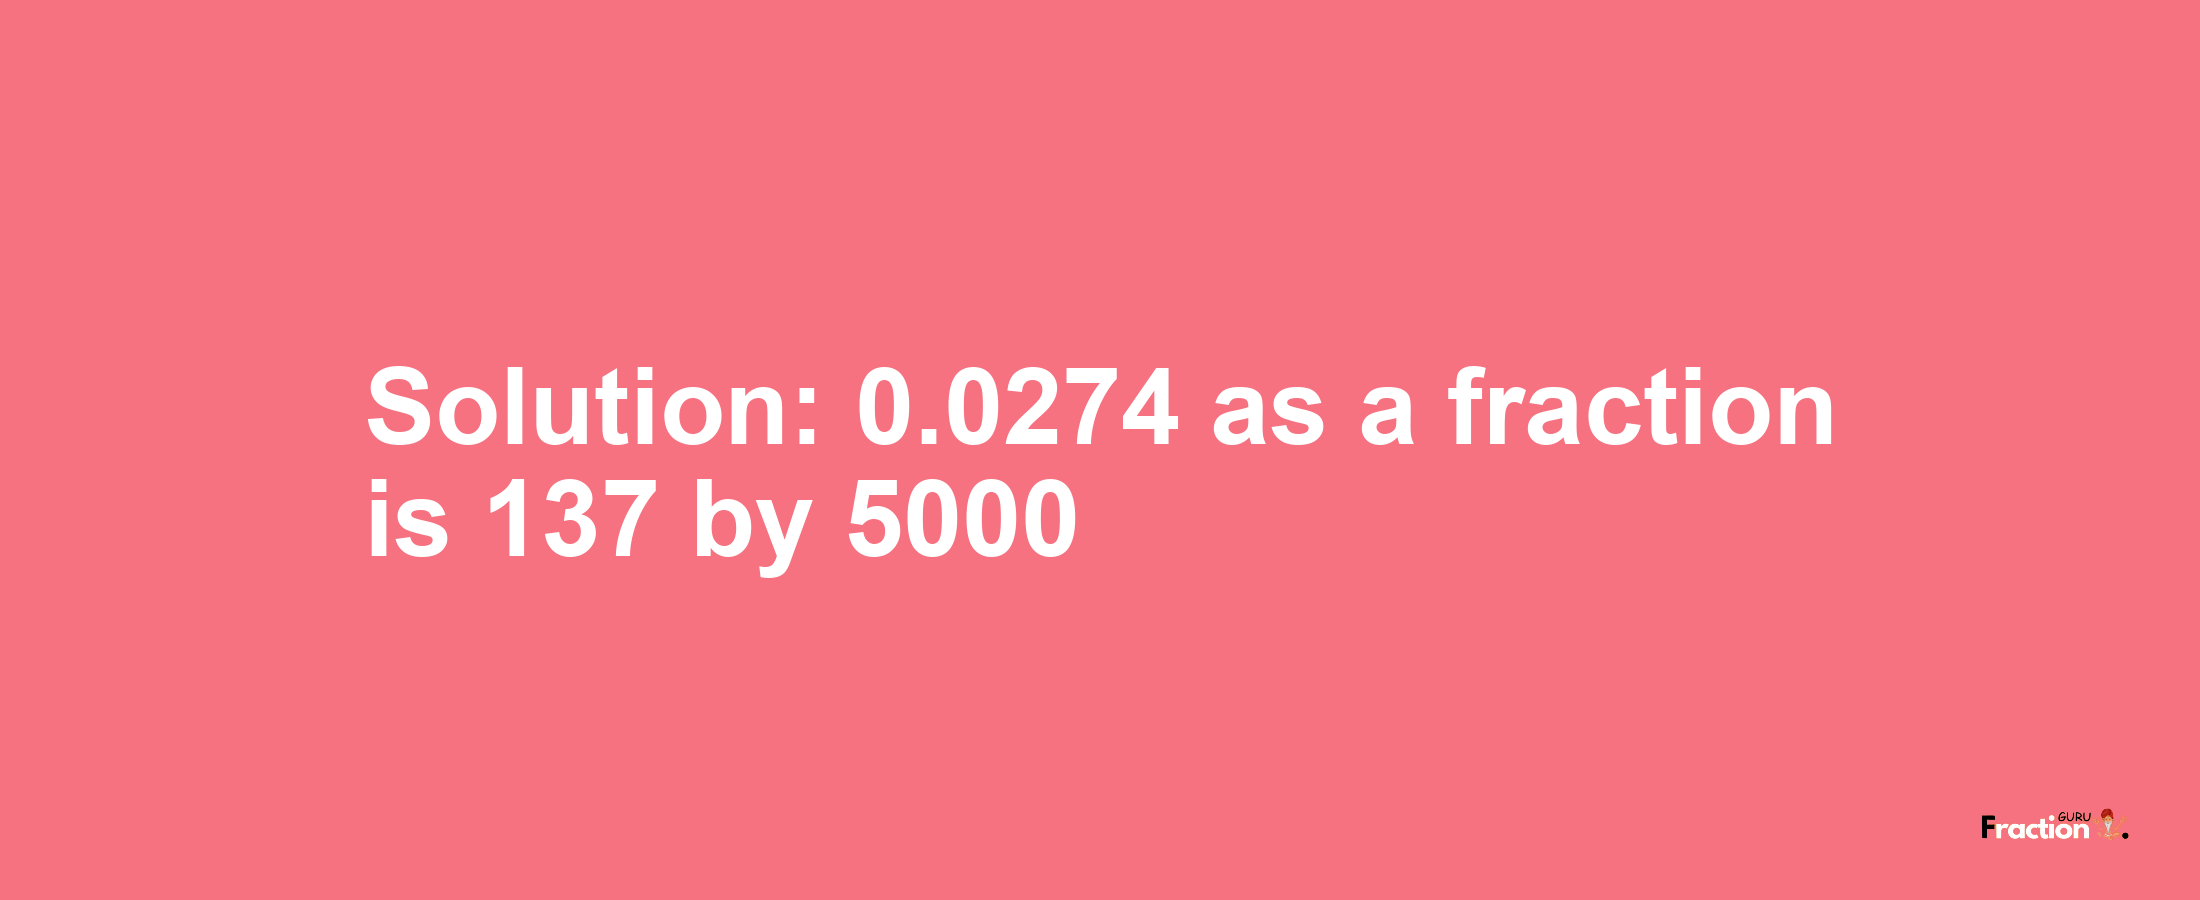 Solution:0.0274 as a fraction is 137/5000